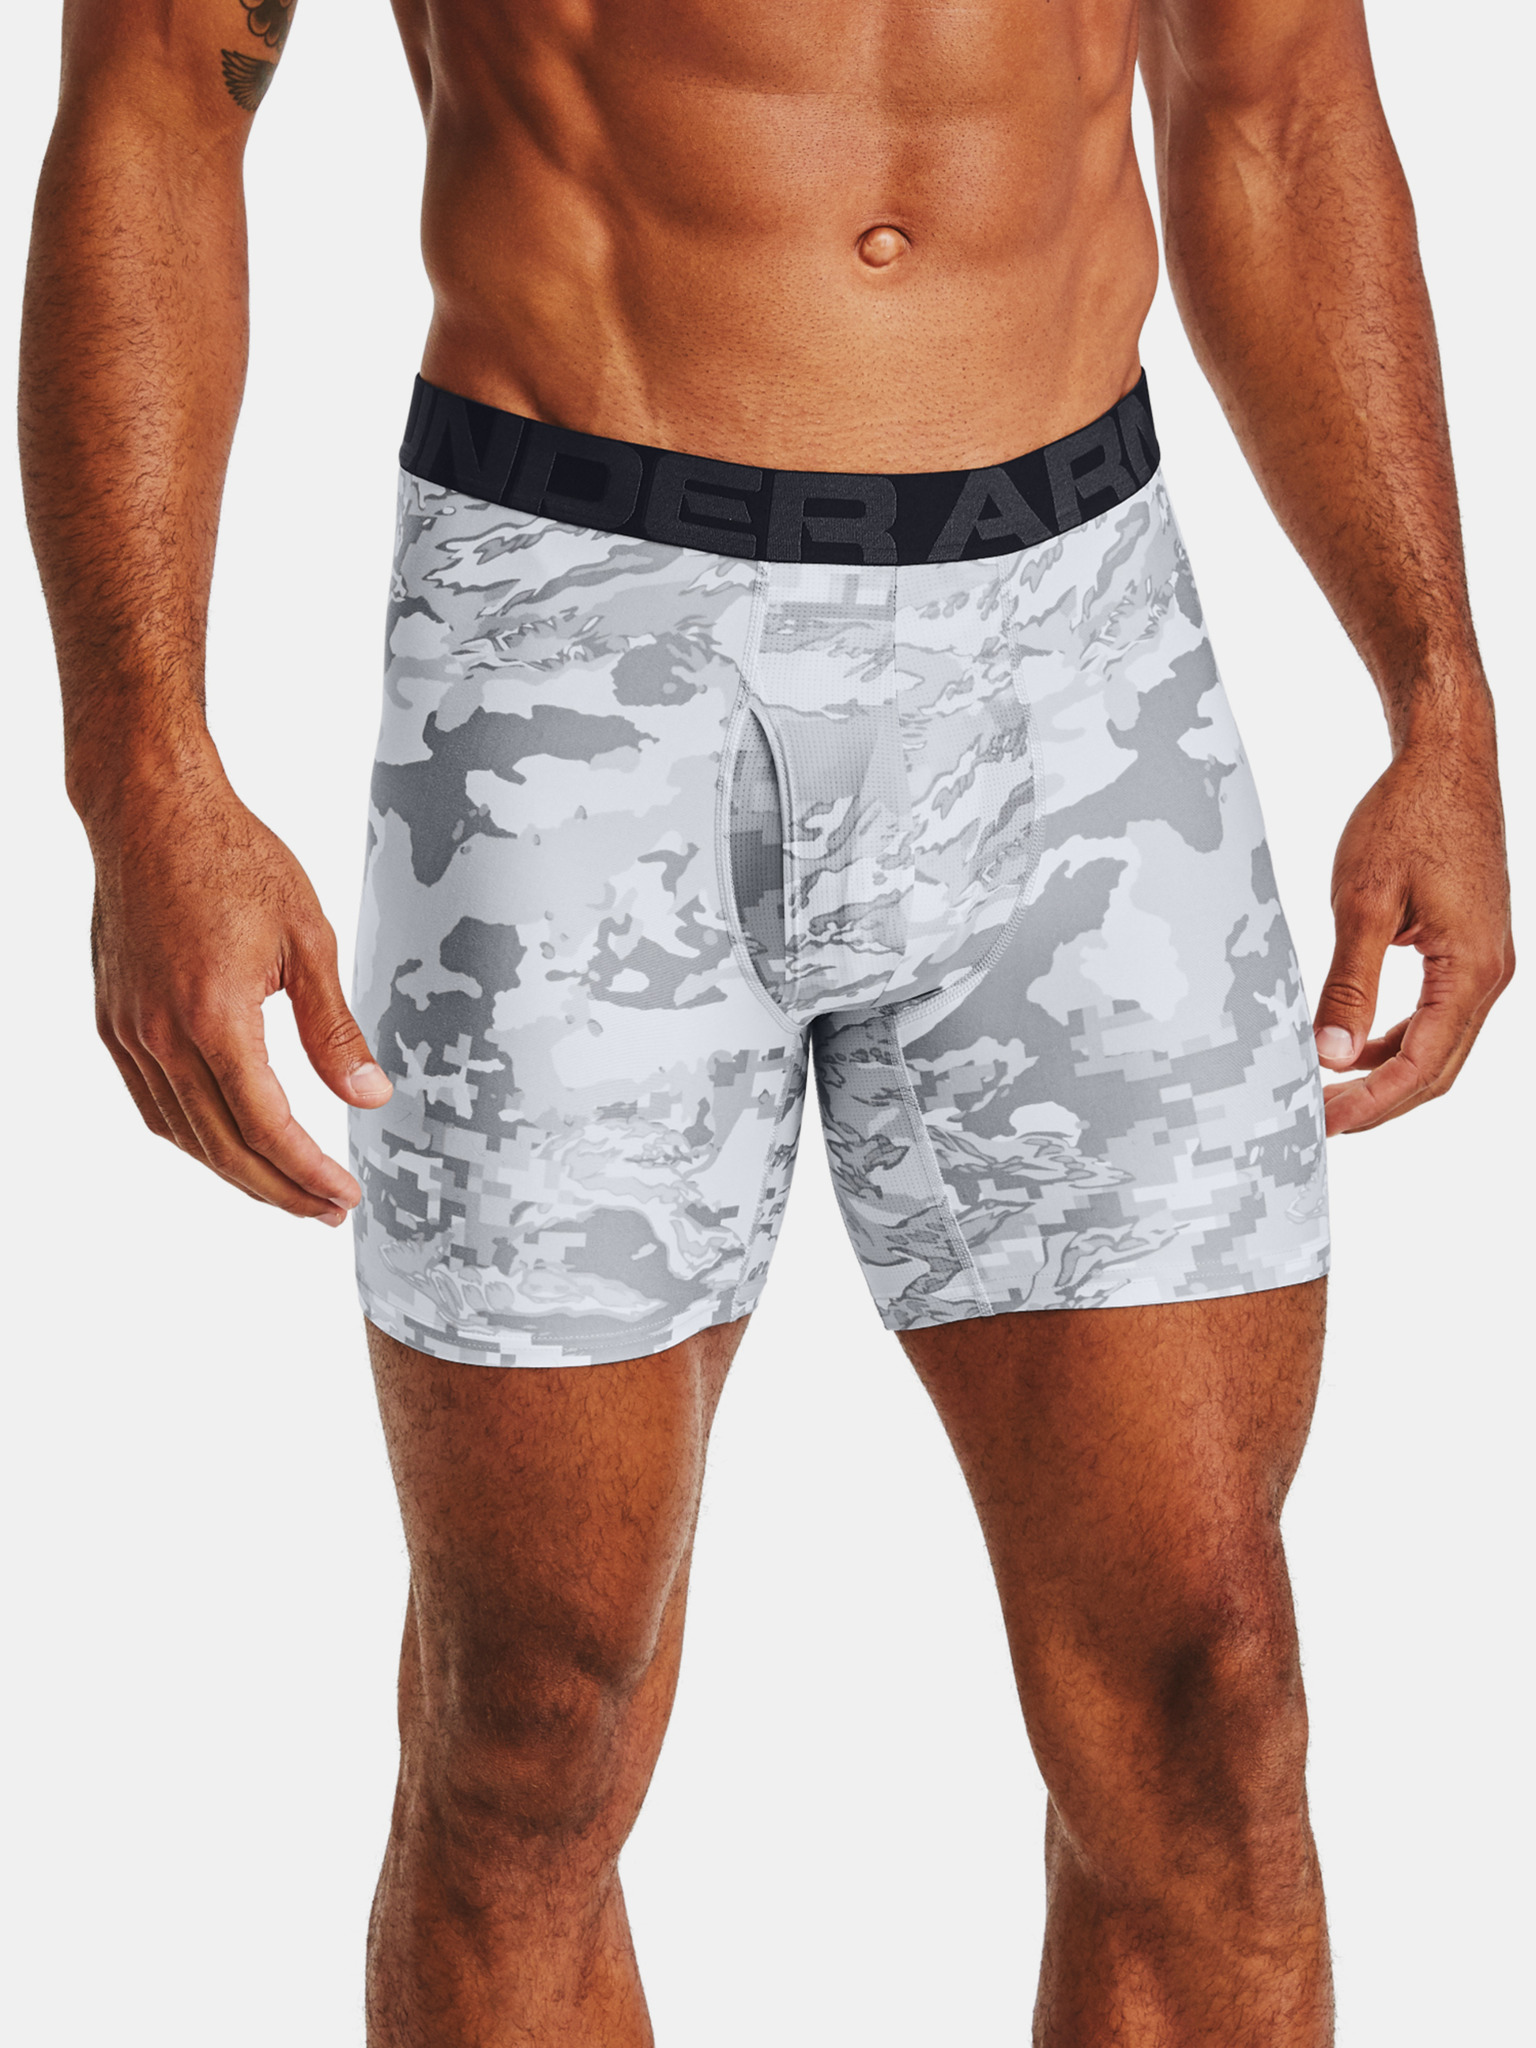 Under Armour - Tech 6in Novelty Boxers 2 pcs